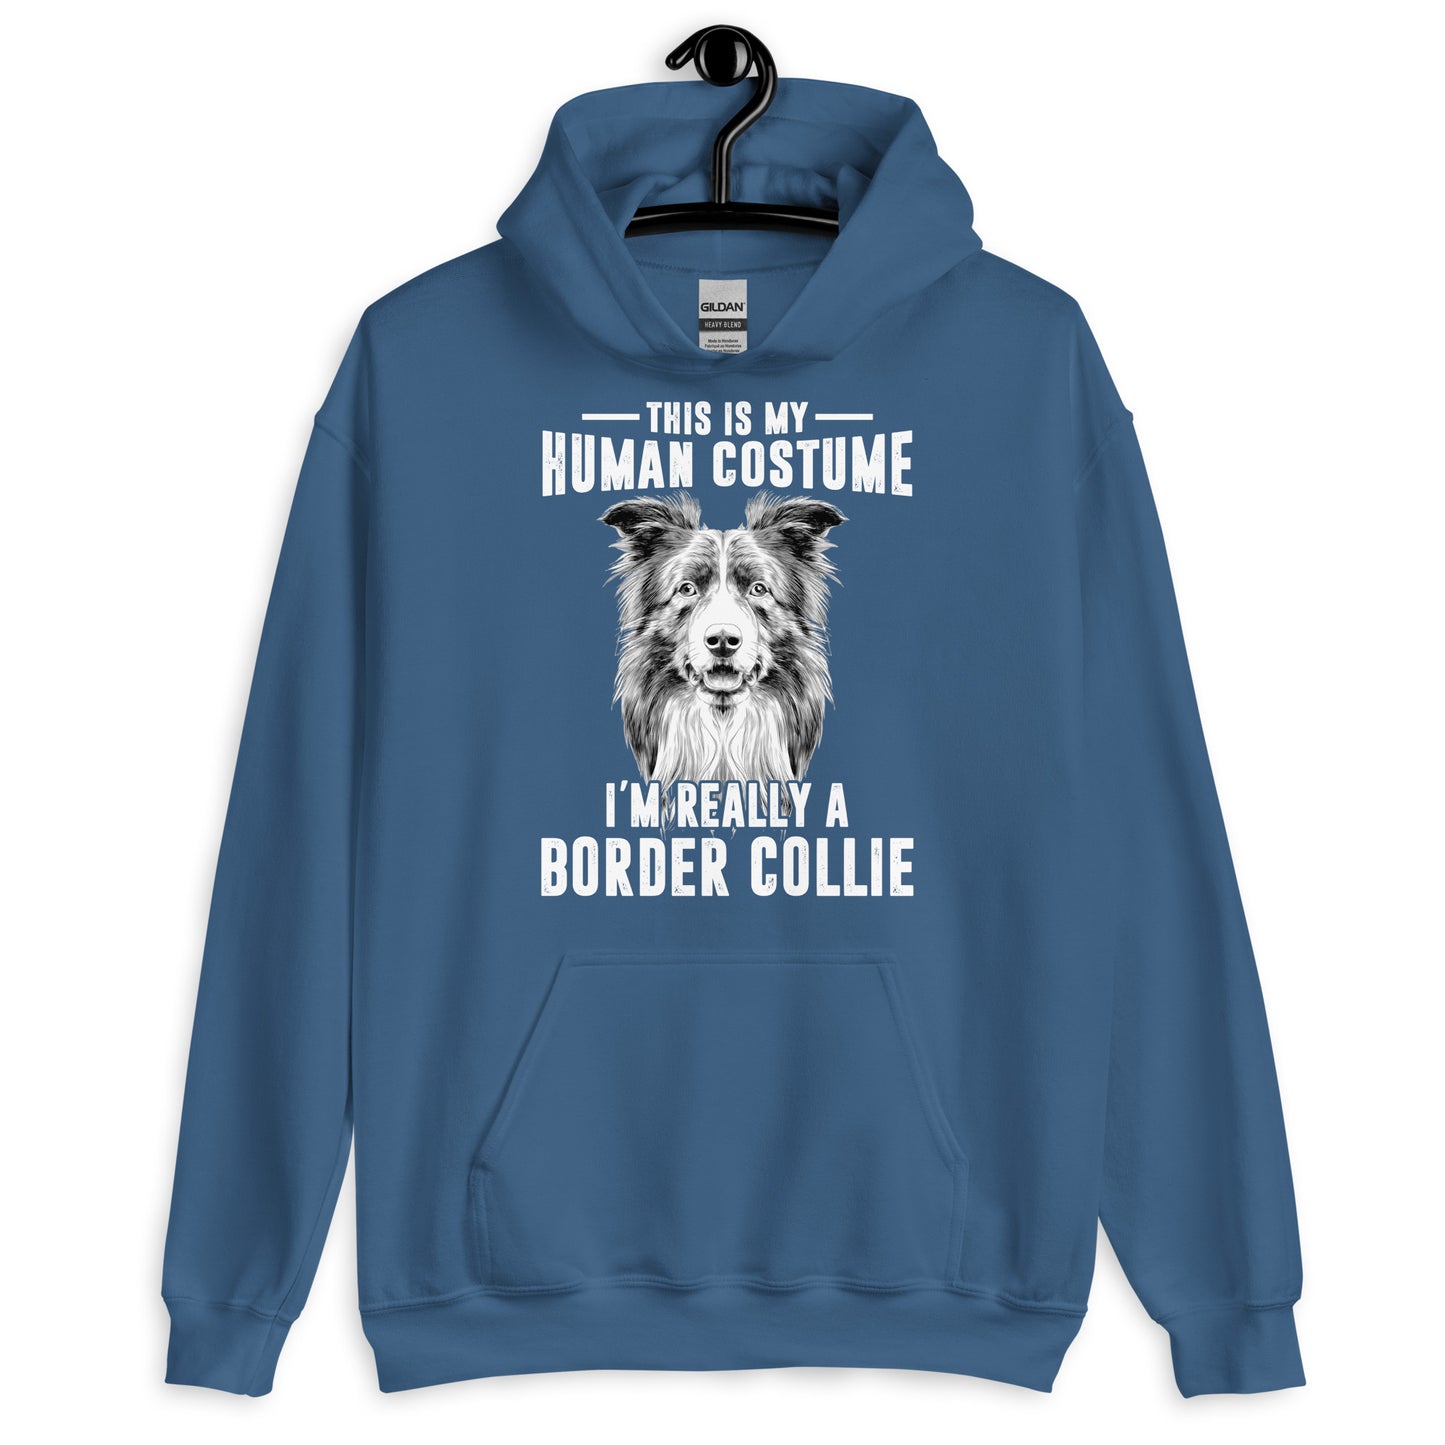 I'm really a Border Collie Hoodie